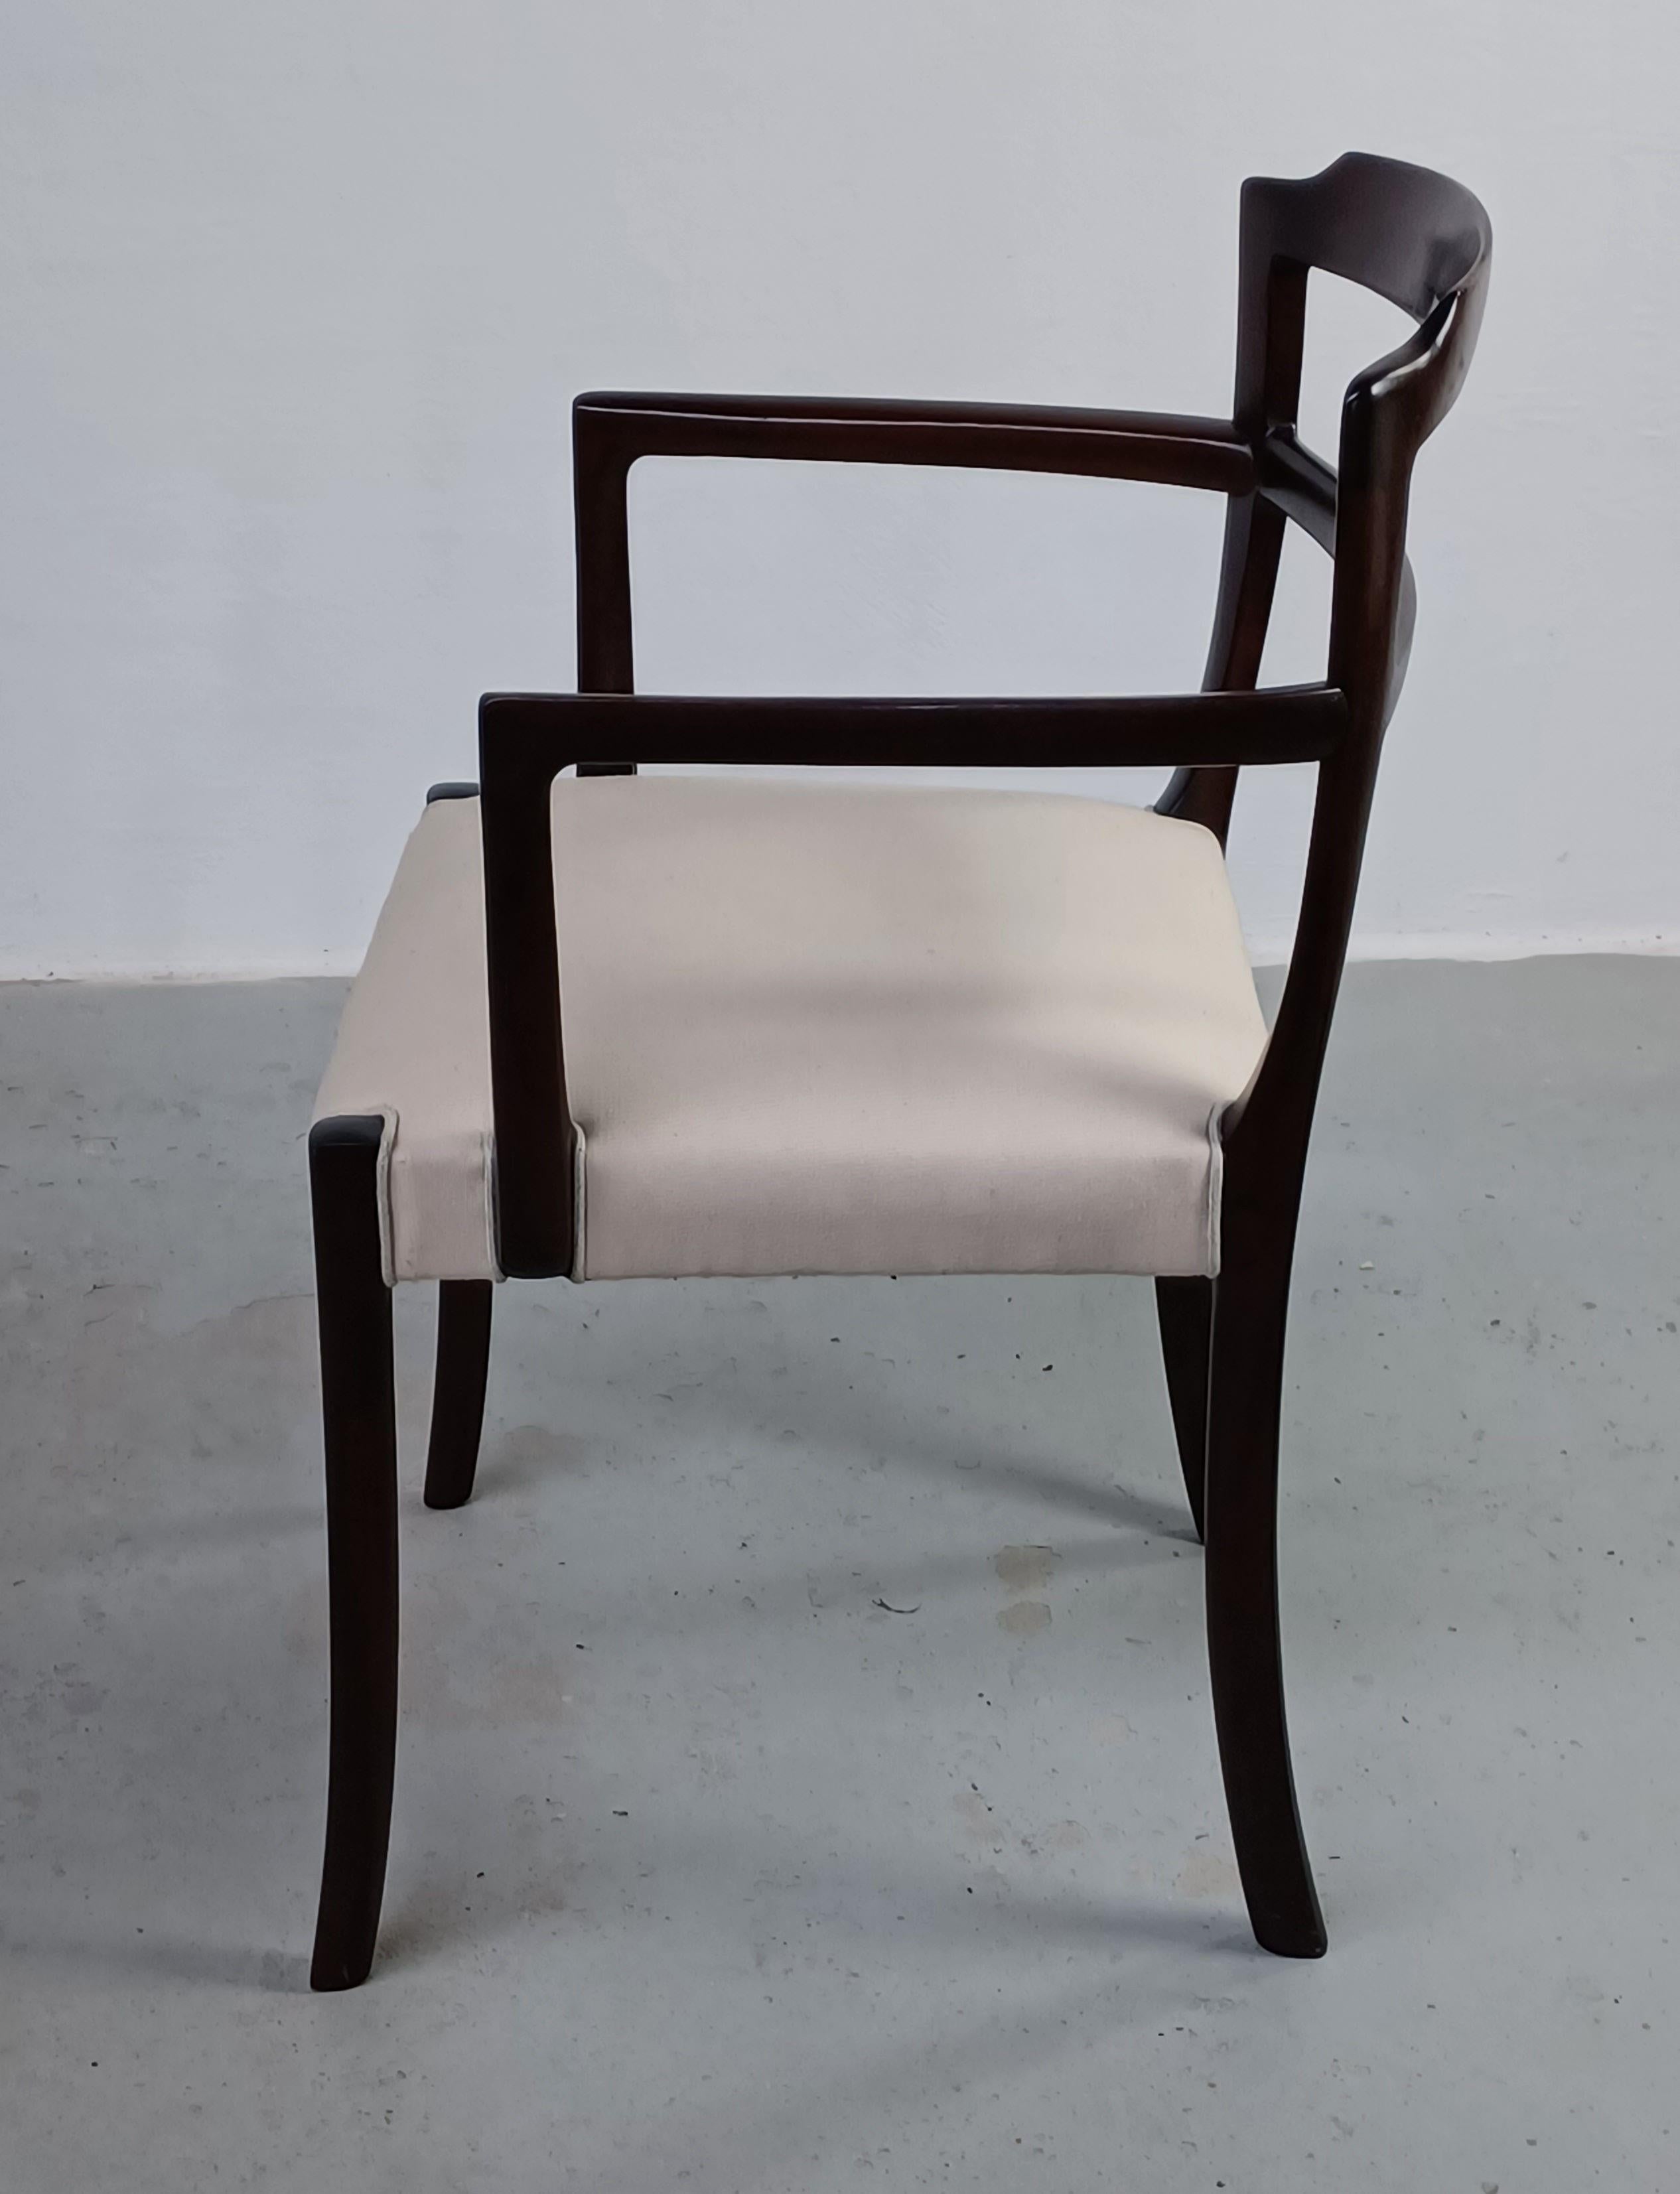 1960's Fully Restored Danish Ole Wanscher Mahogany Arm Chair Custom Upholstery In Good Condition For Sale In Knebel, DK